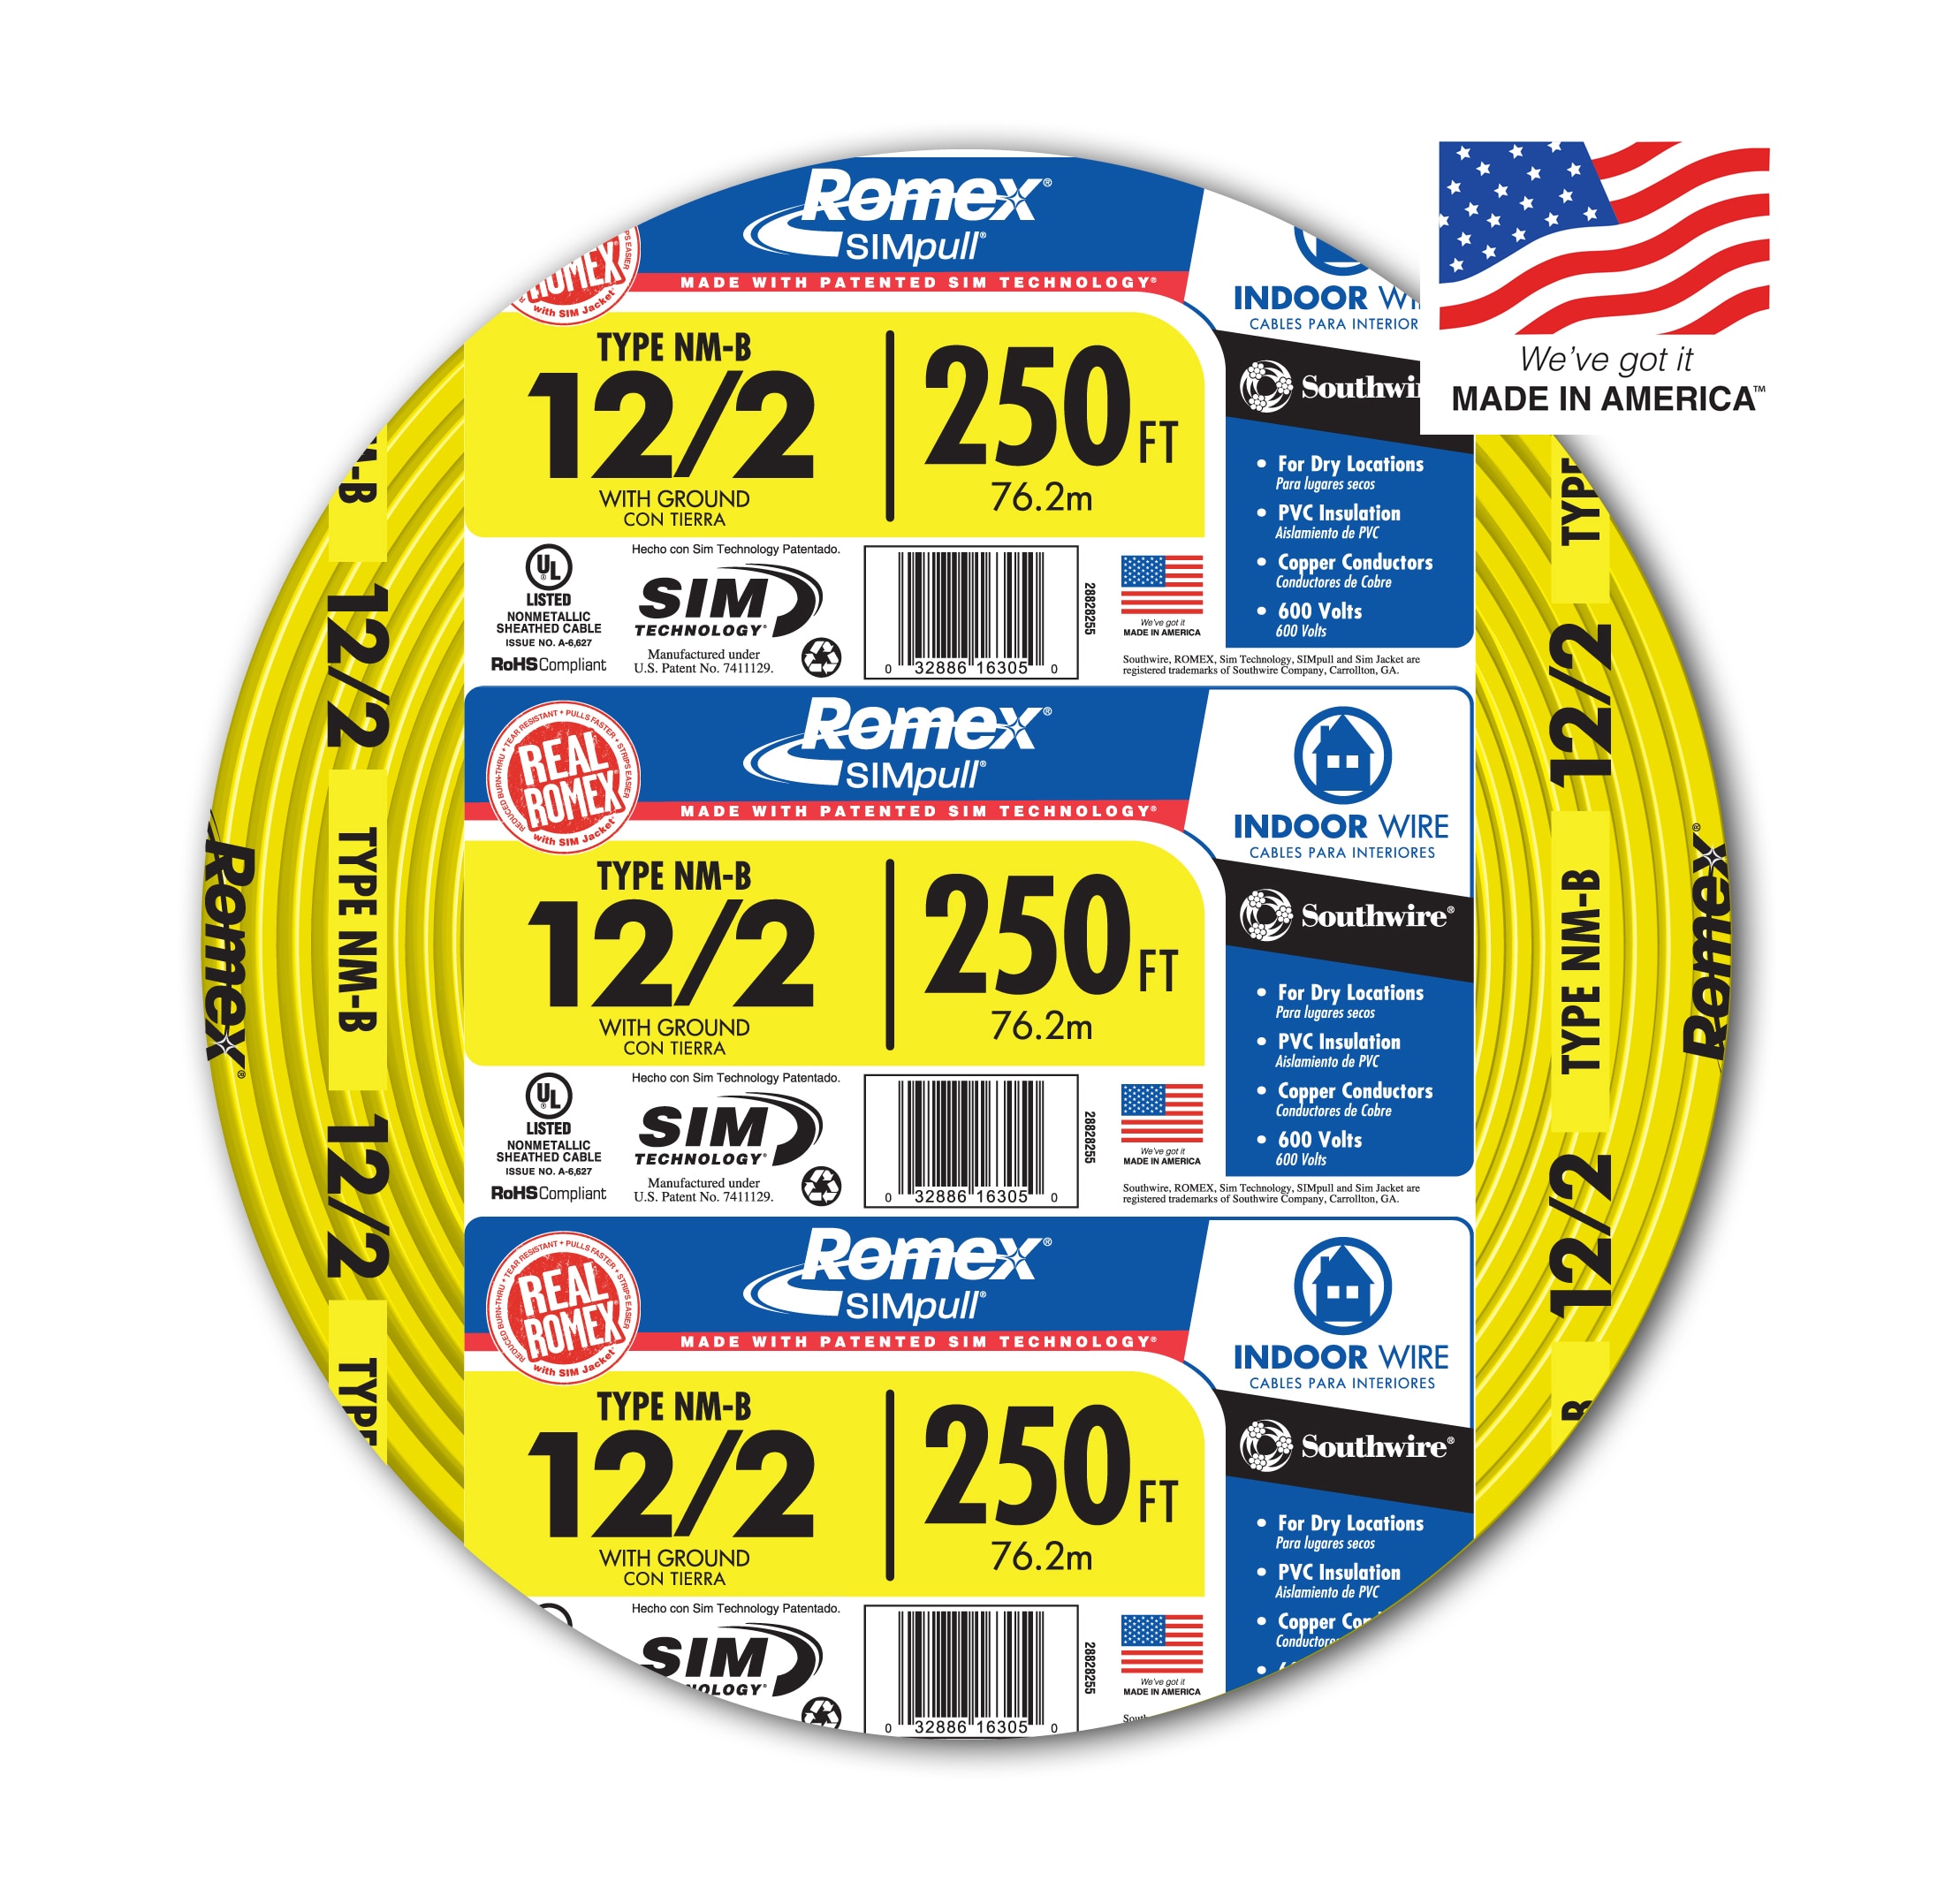 ALL LENGTHS AVAILABLE 8/2 W/GR 35' FT ROMEX INDOOR ELECTRICAL WIRE 